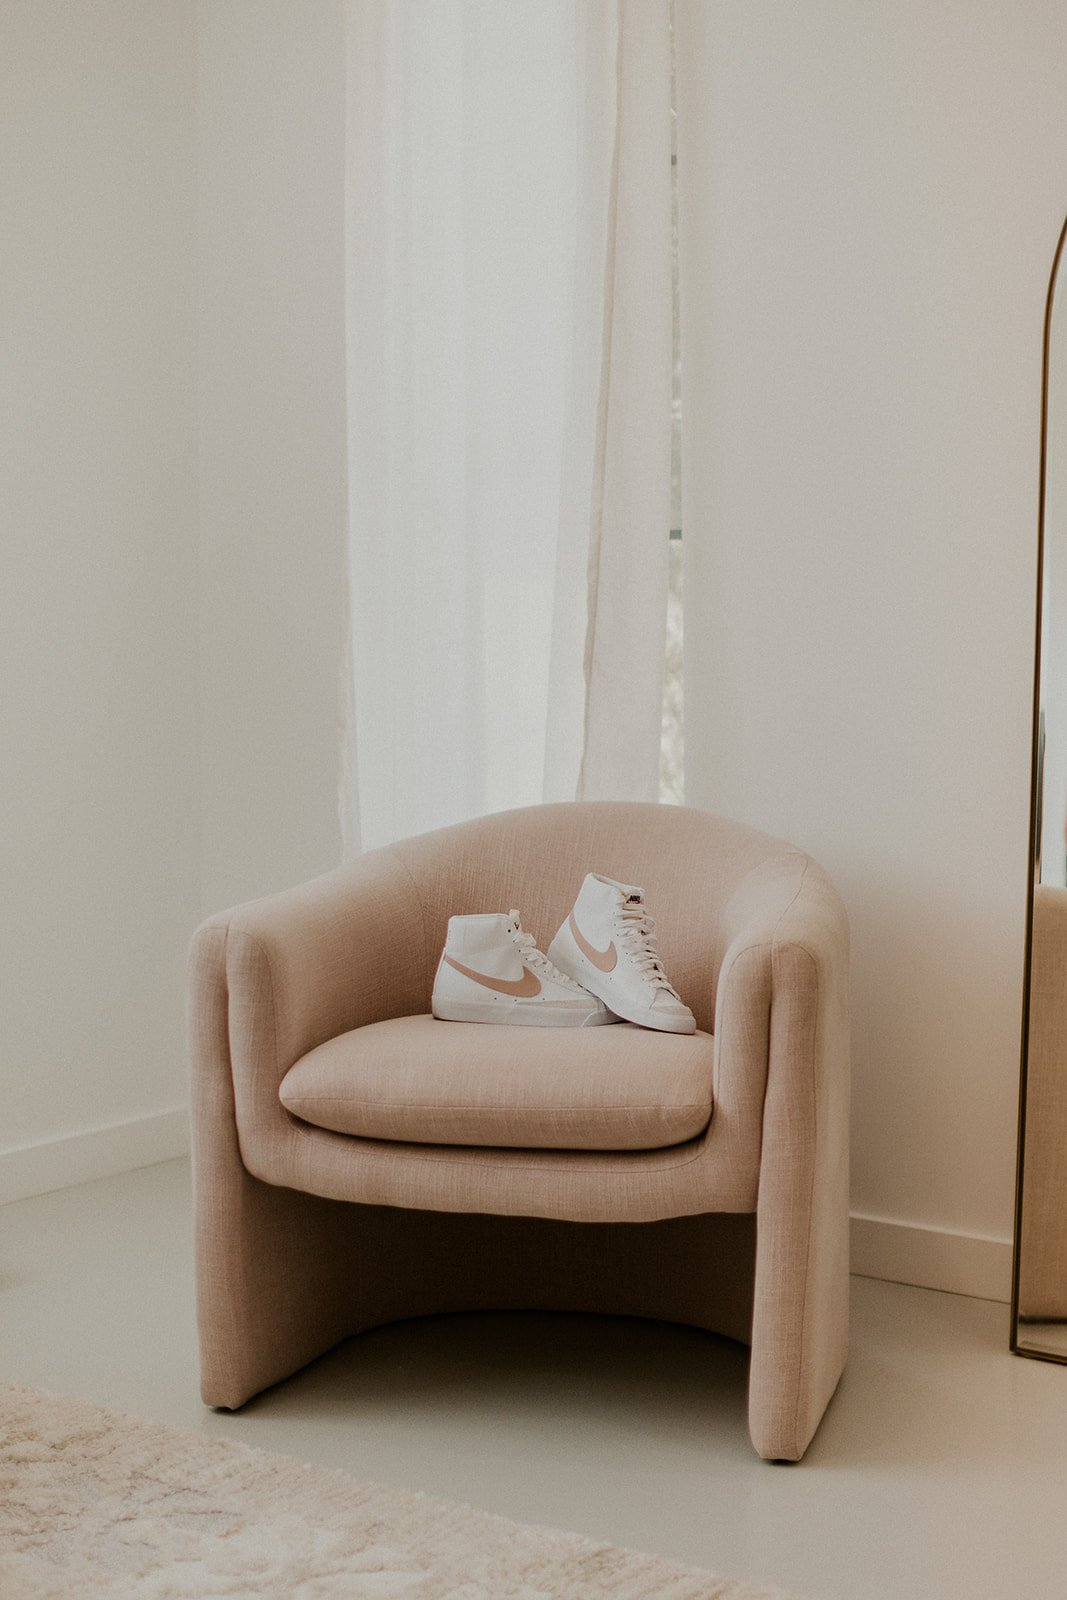 The brides dancing sneakers on a lounge chair in the bridal suite.